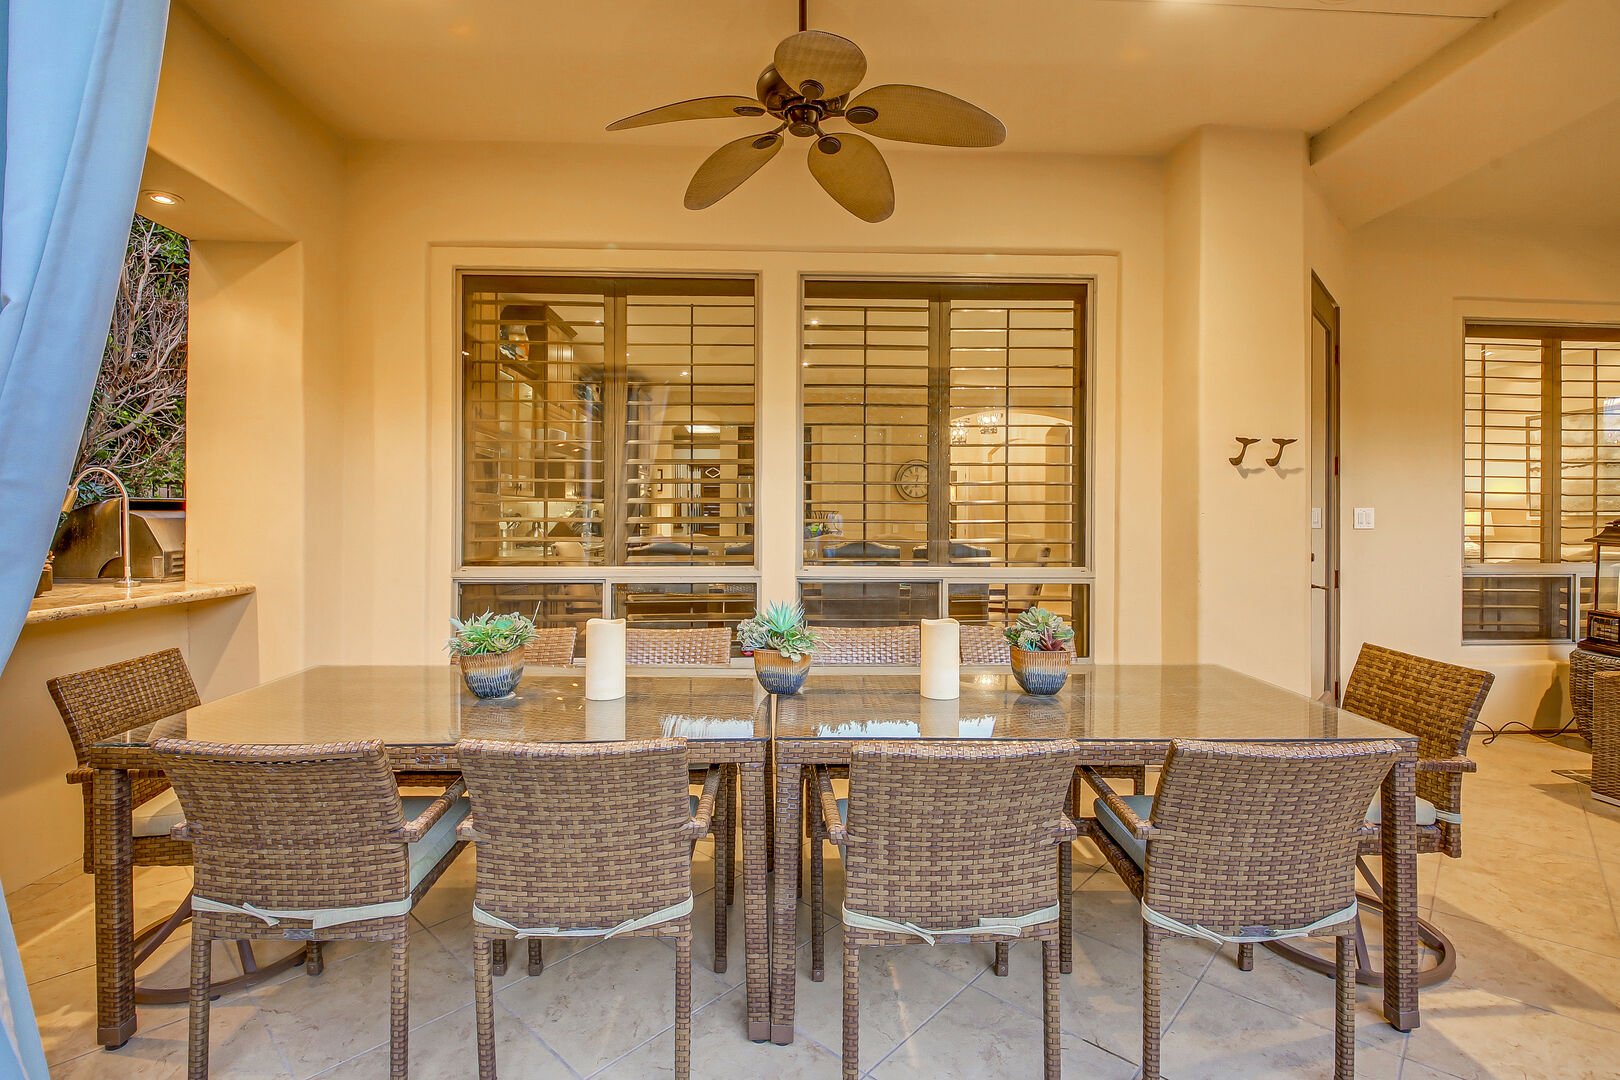 Stay cool under both of the patio ceiling fans.